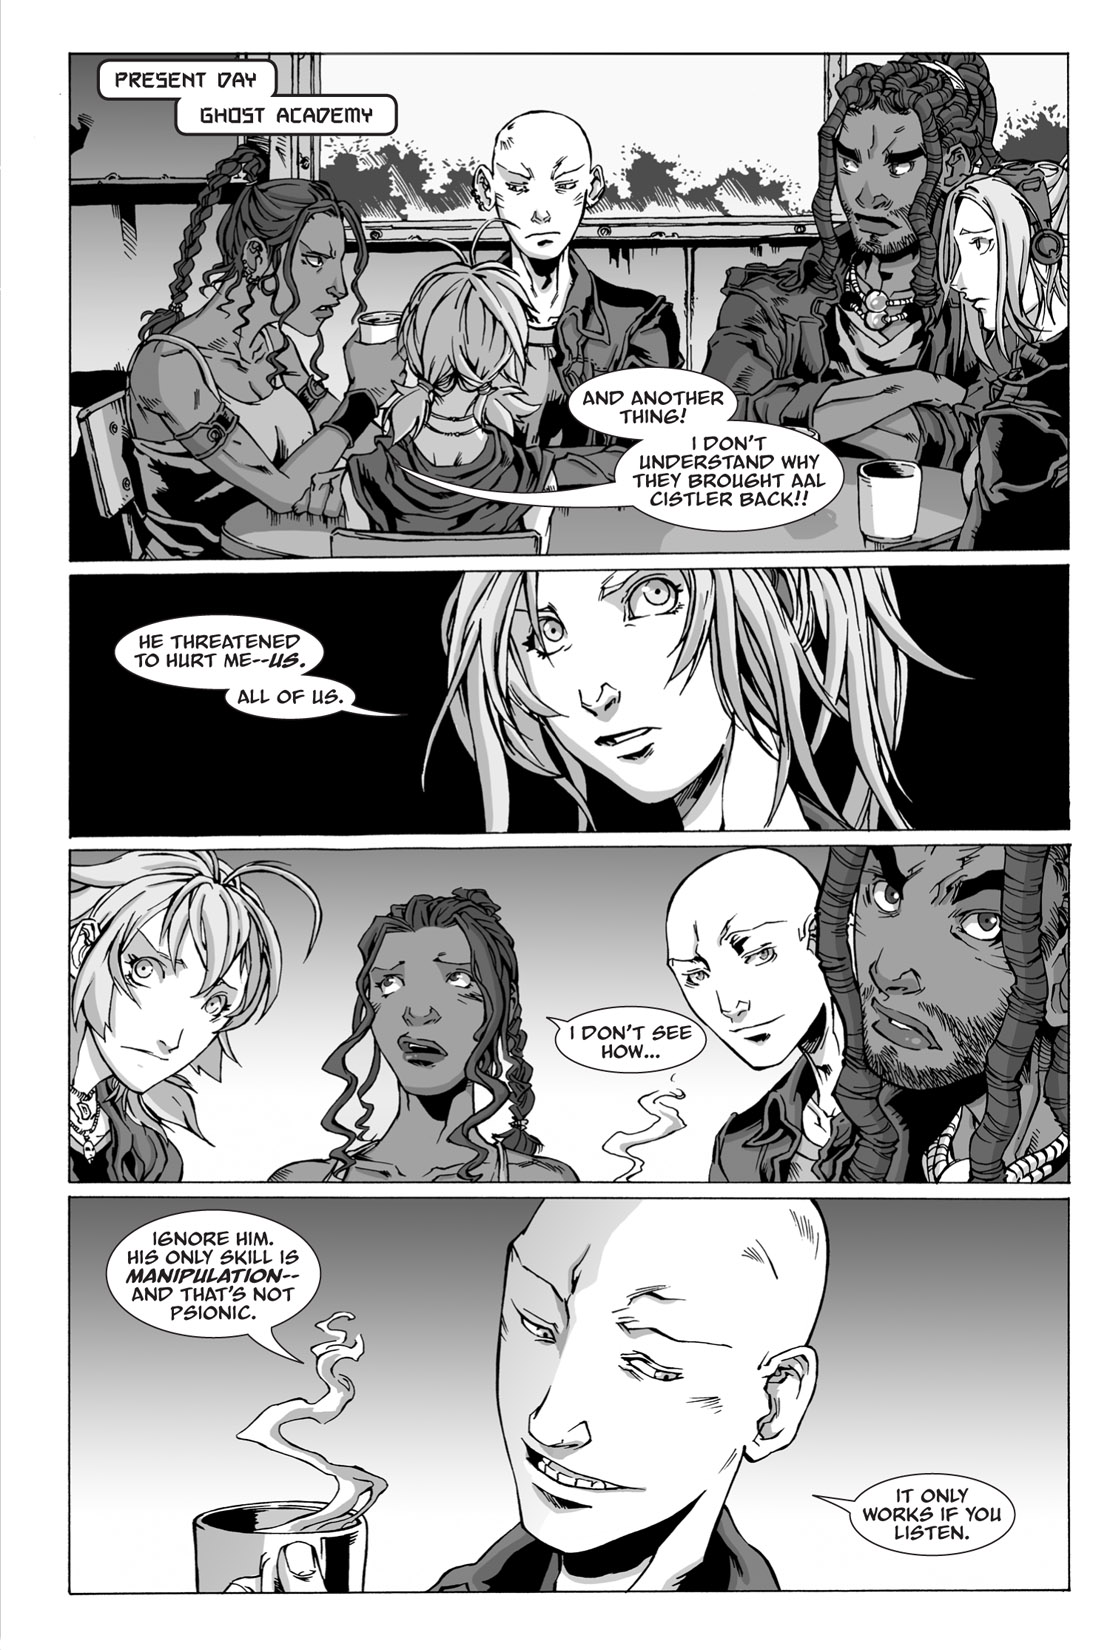 Read online StarCraft: Ghost Academy comic -  Issue # TPB 2 - 145